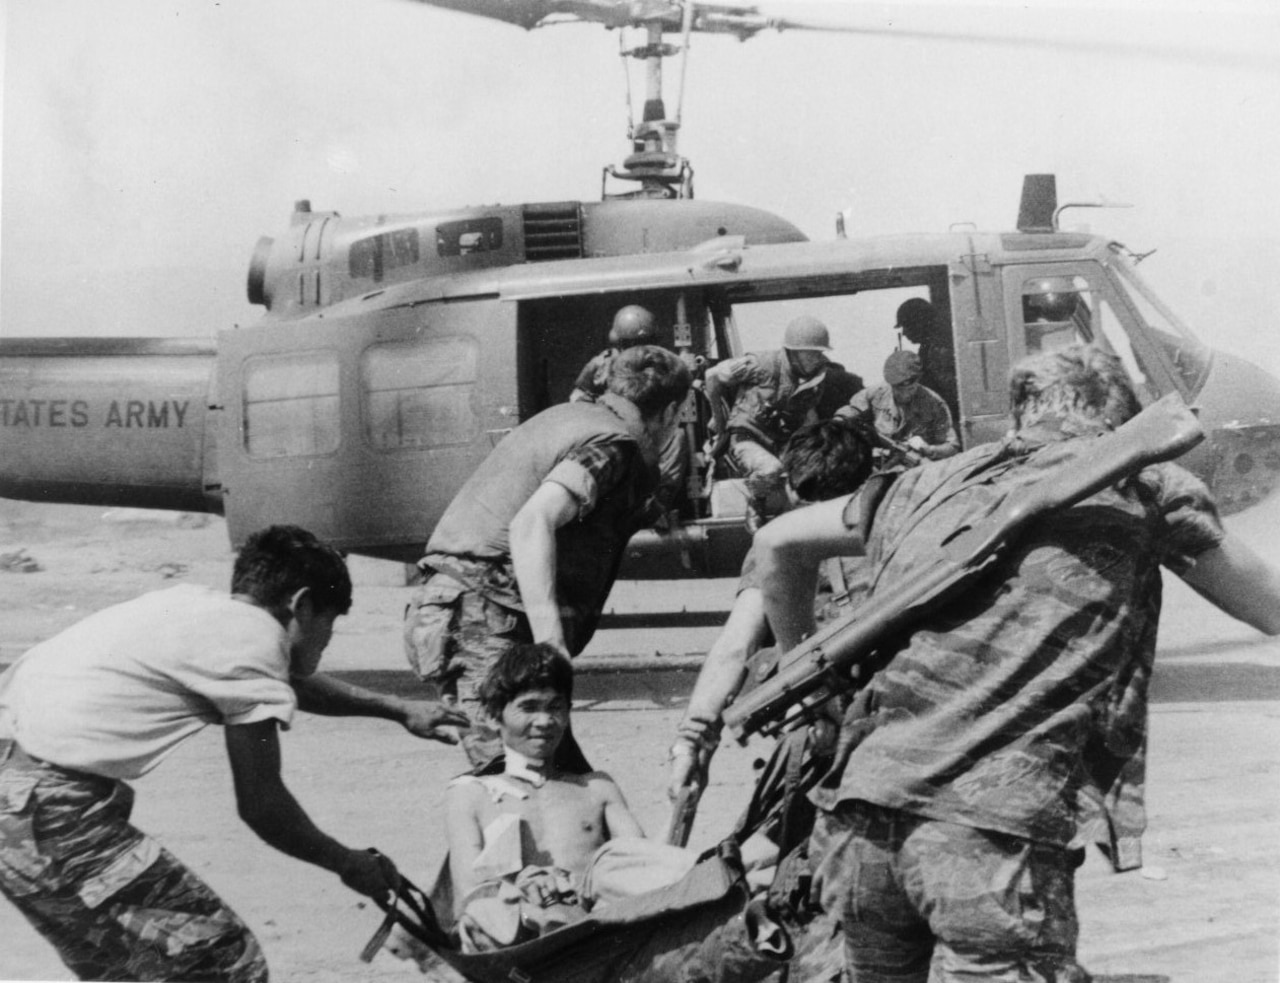 Several men rush a wounded boy in a stretcher toward a helicopter.